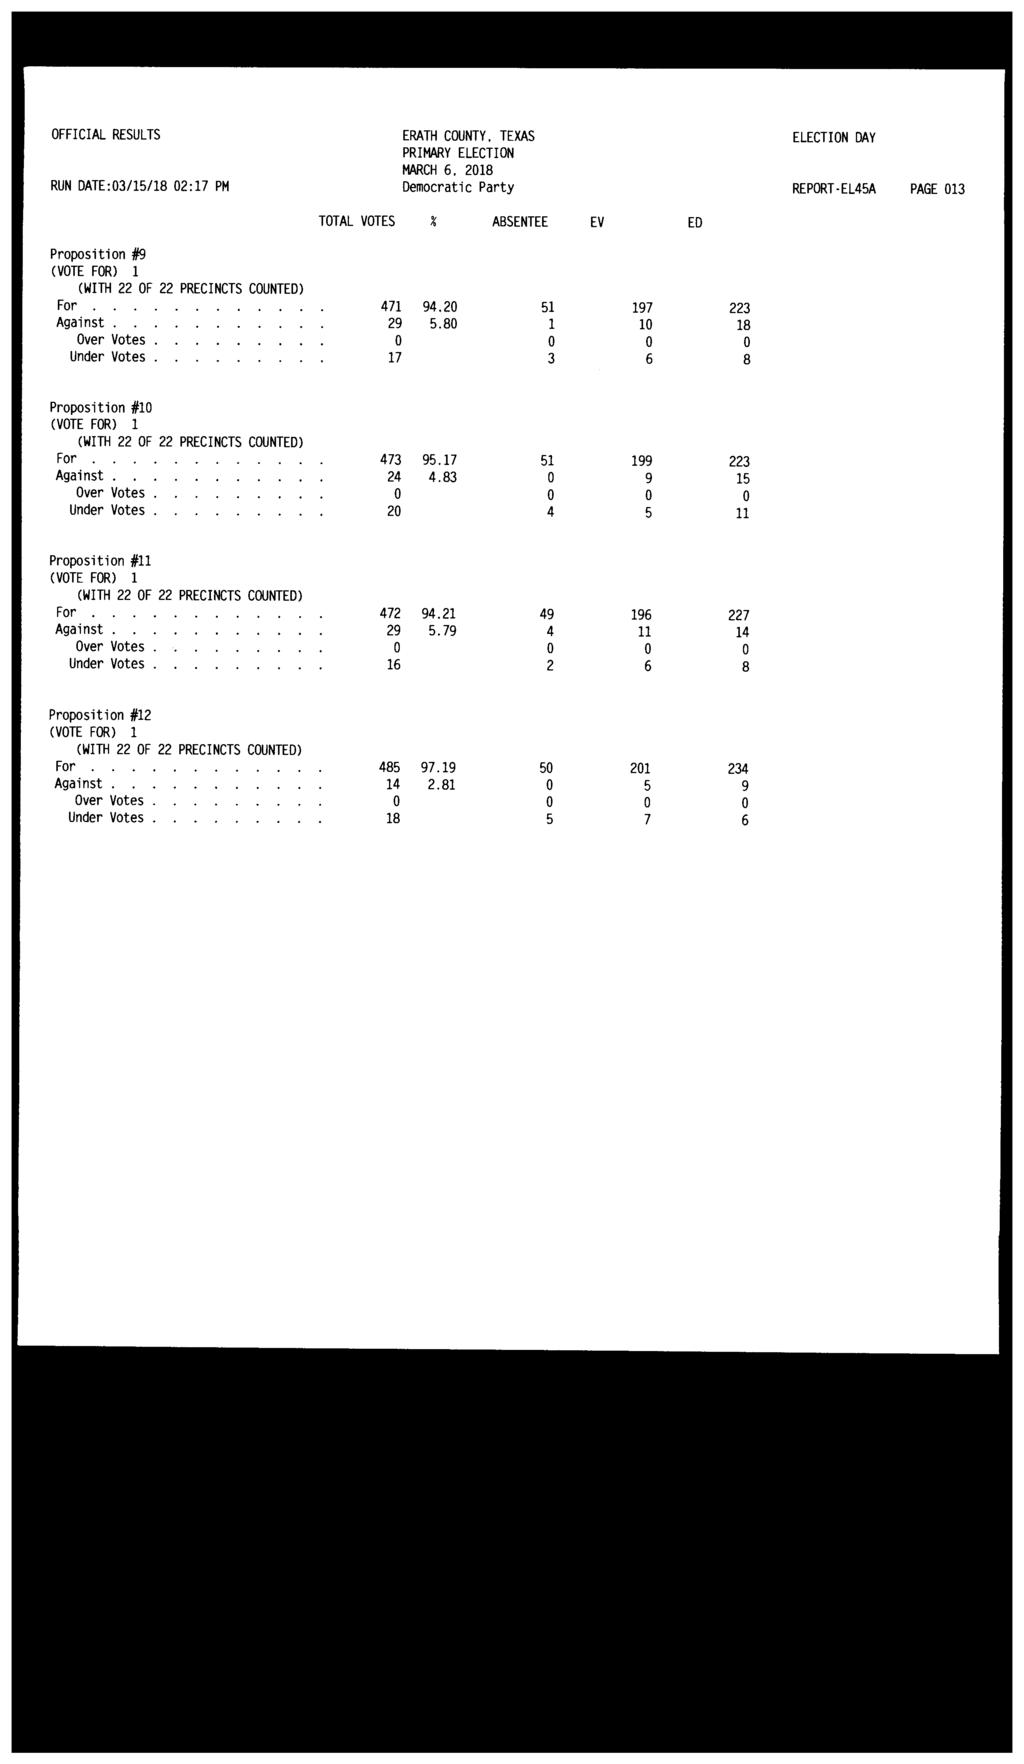 OFFICIAL RESULTS ERATH COUNTY. TEXAS MARCH 6. 2018 RUN DATE:03/15/18 02:17 PM Democratic Party REPORT-EL45A PAGE 013 Proposition #9 For 471 94.20 51 197 223 Against. 29 5.80 1 10 18 Under Votes.